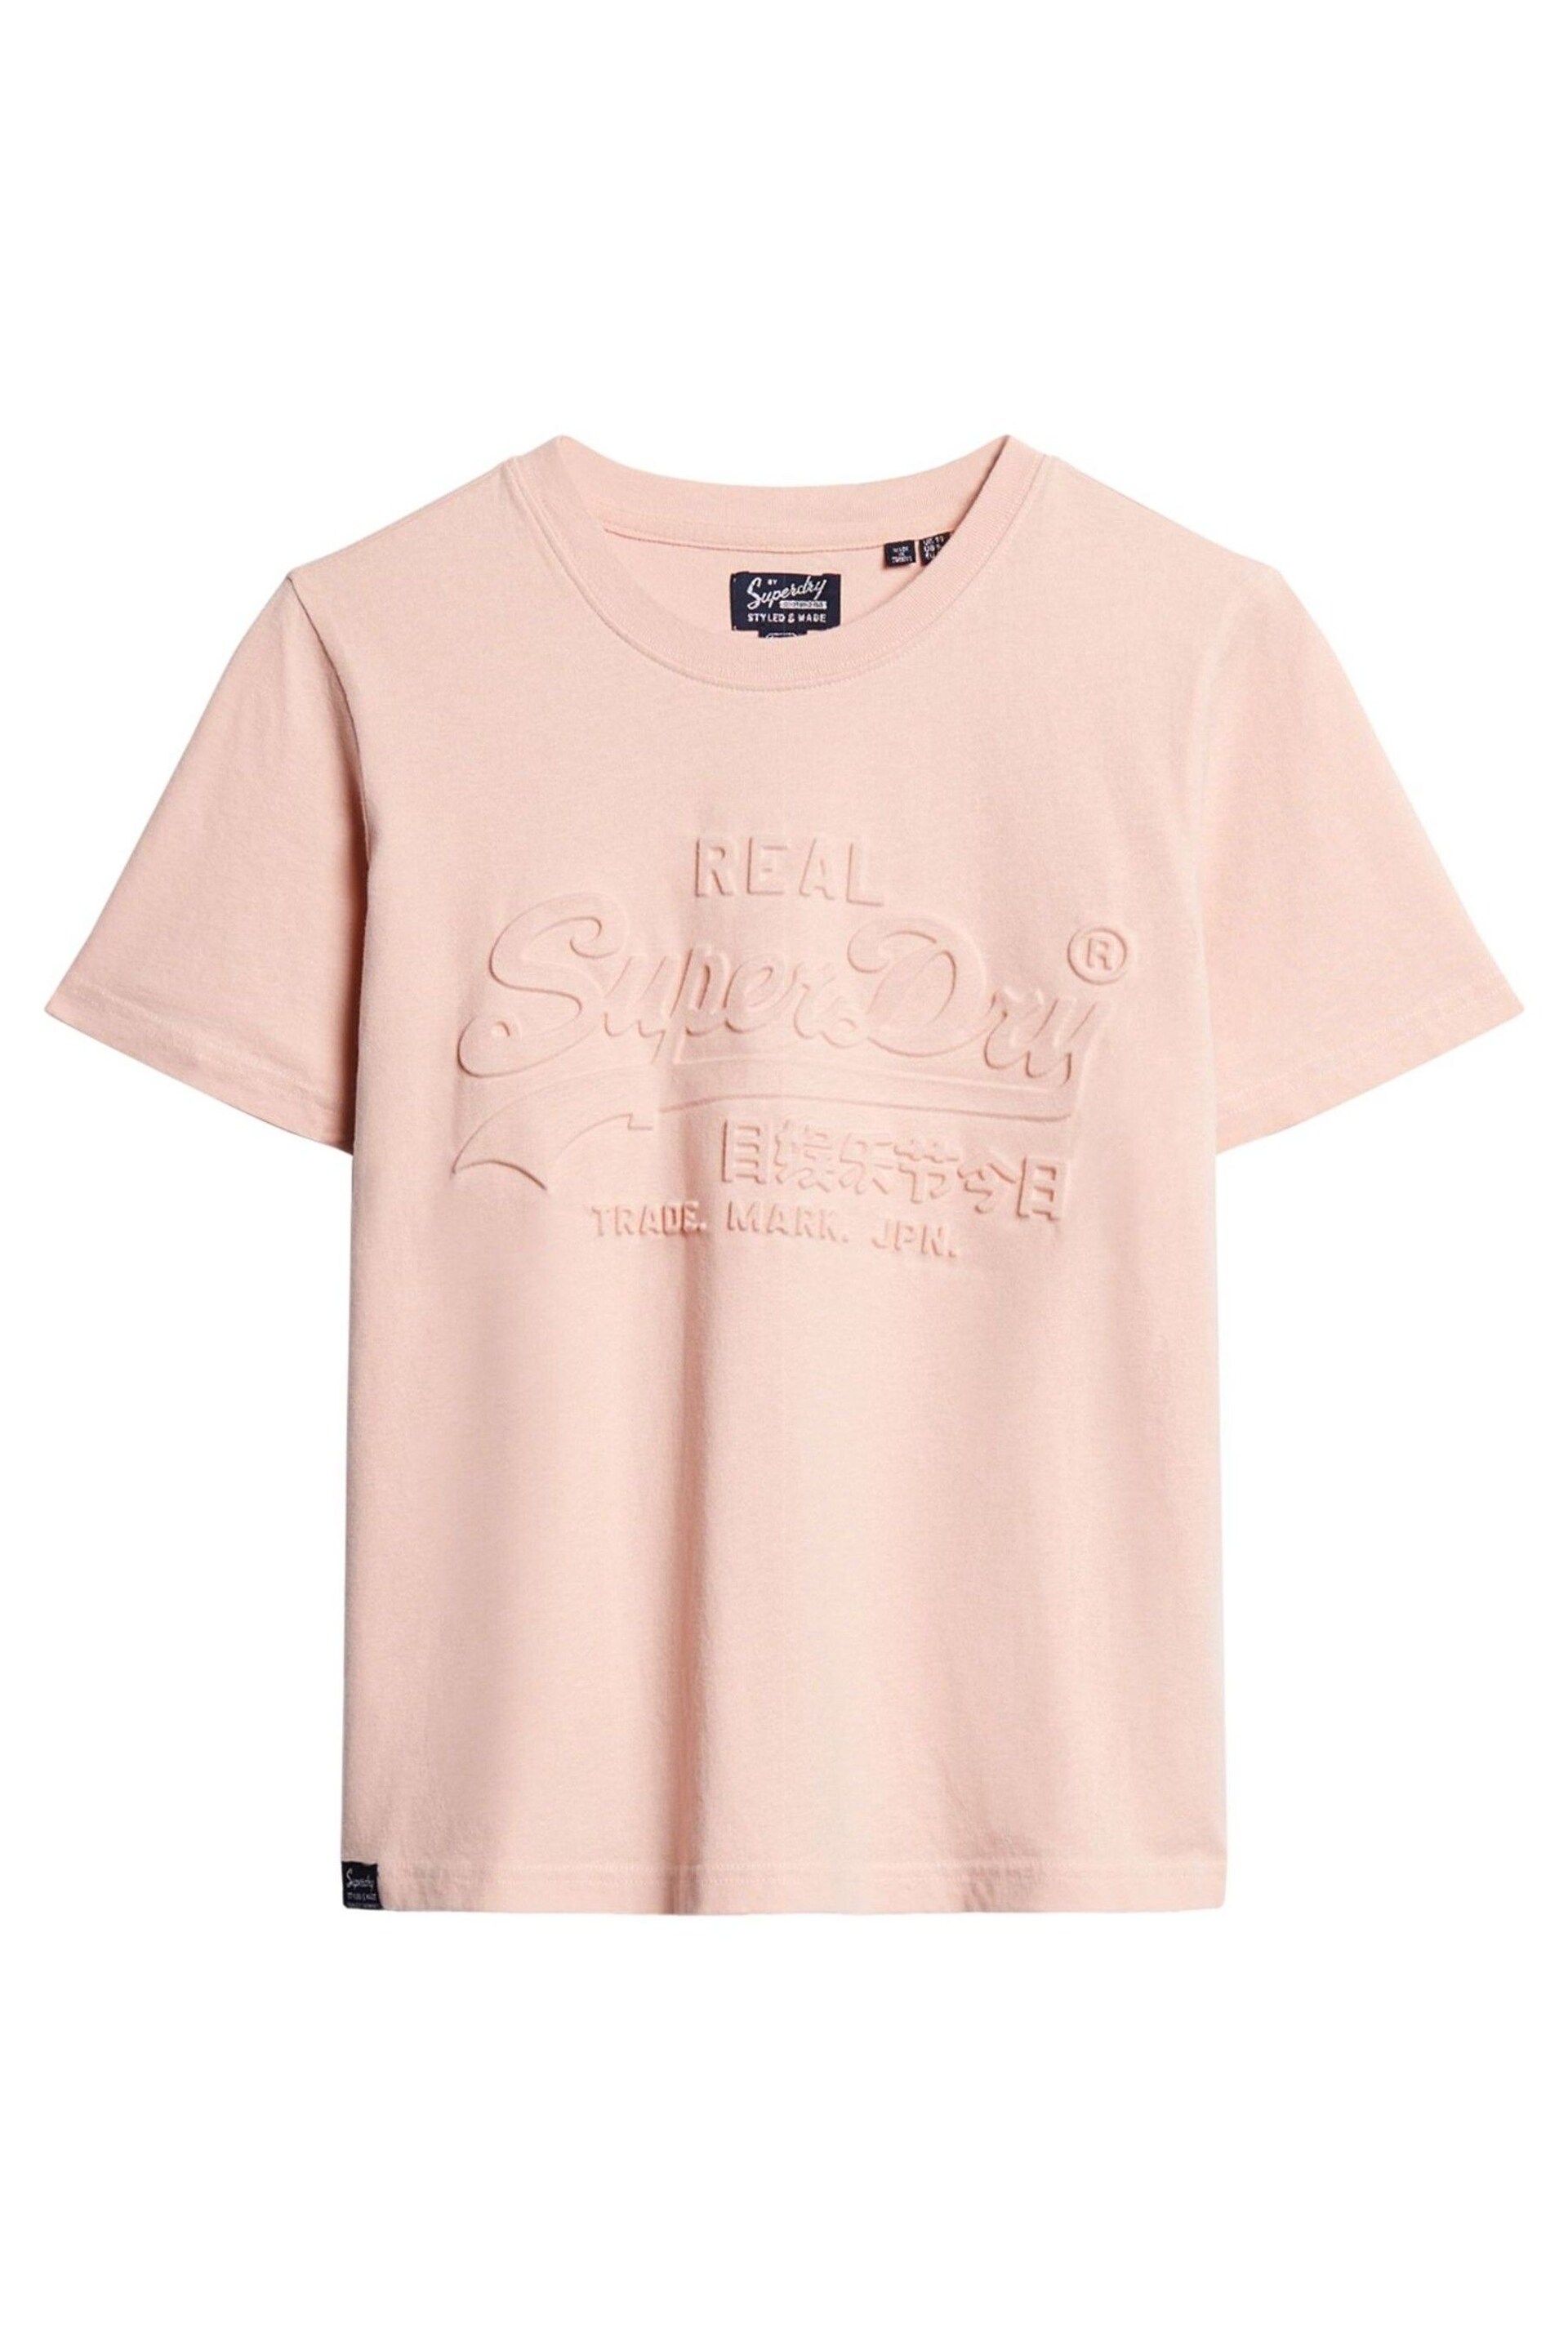 Superdry Pink Embossed Relaxed T-Shirt - Image 4 of 6